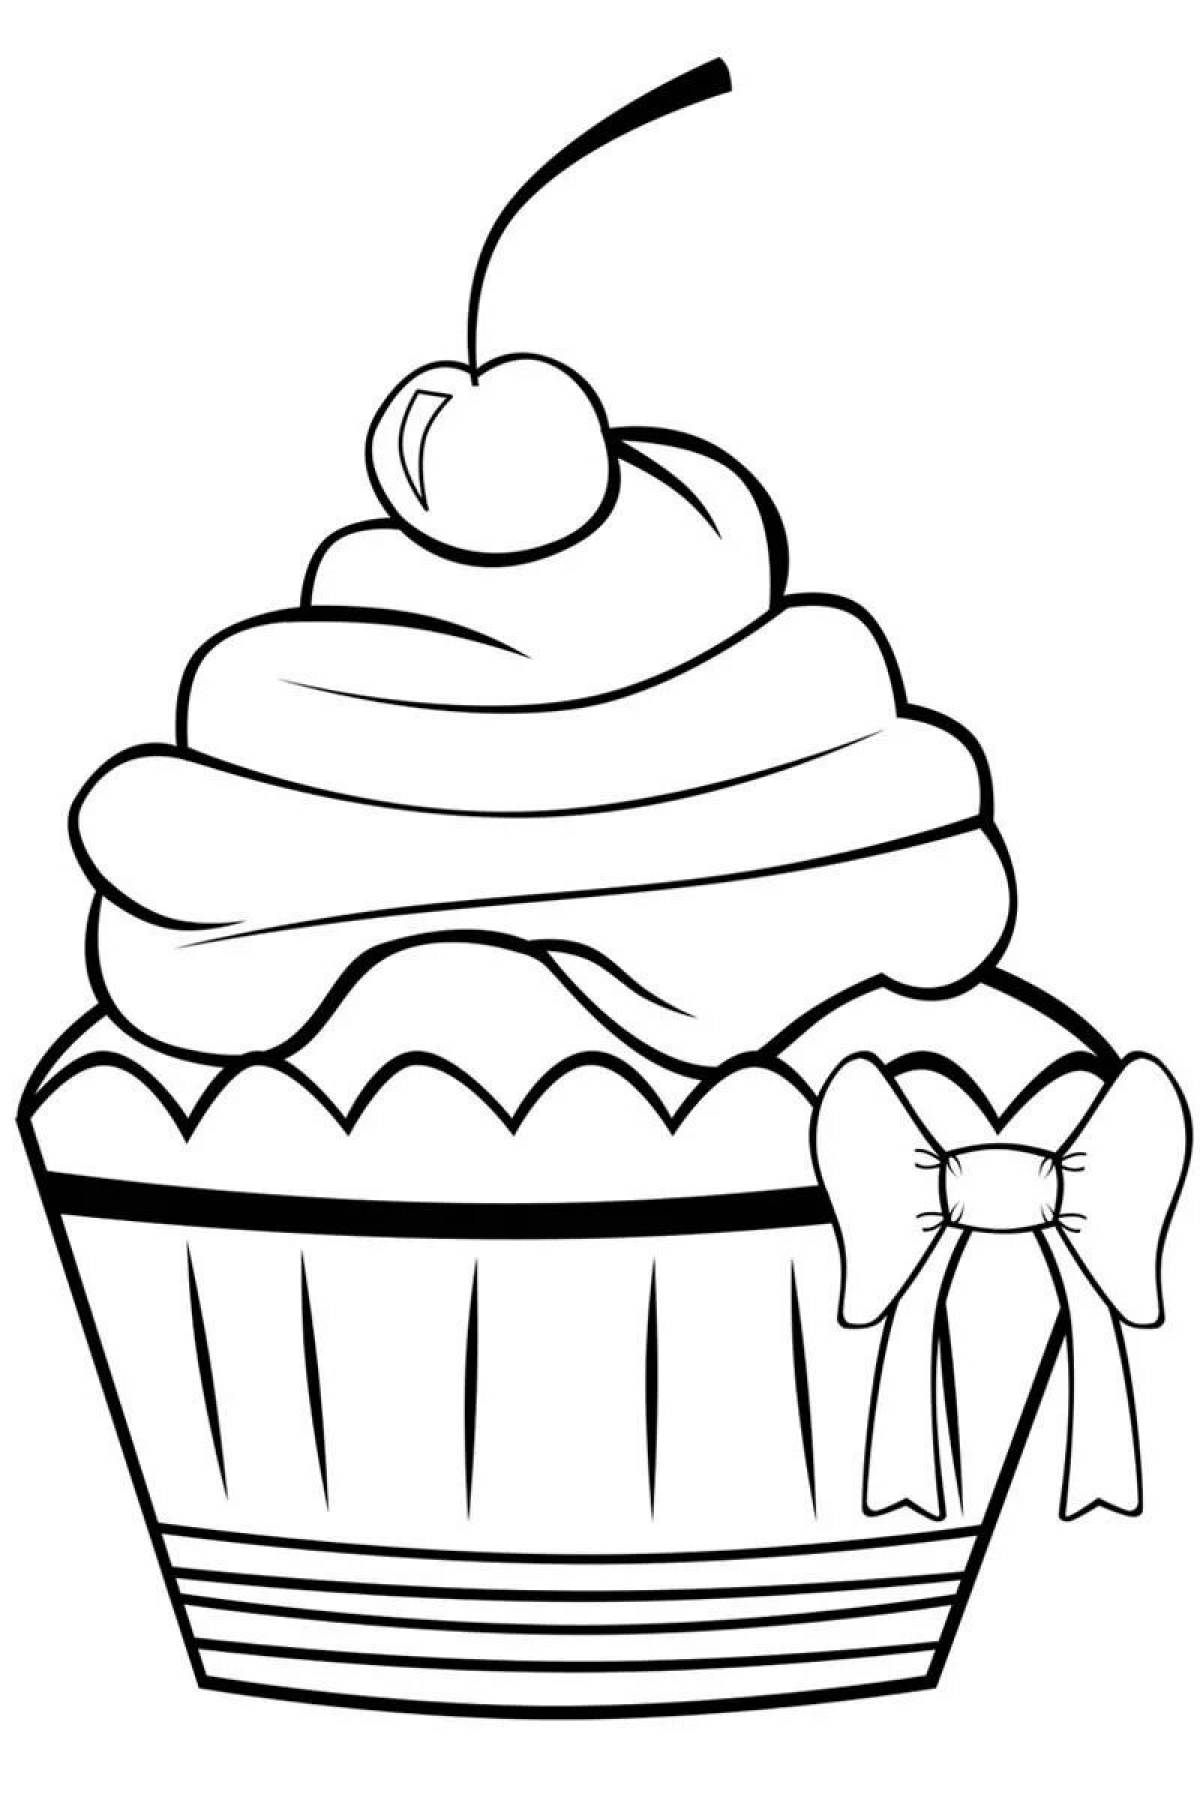 Moist pastries for coloring pages